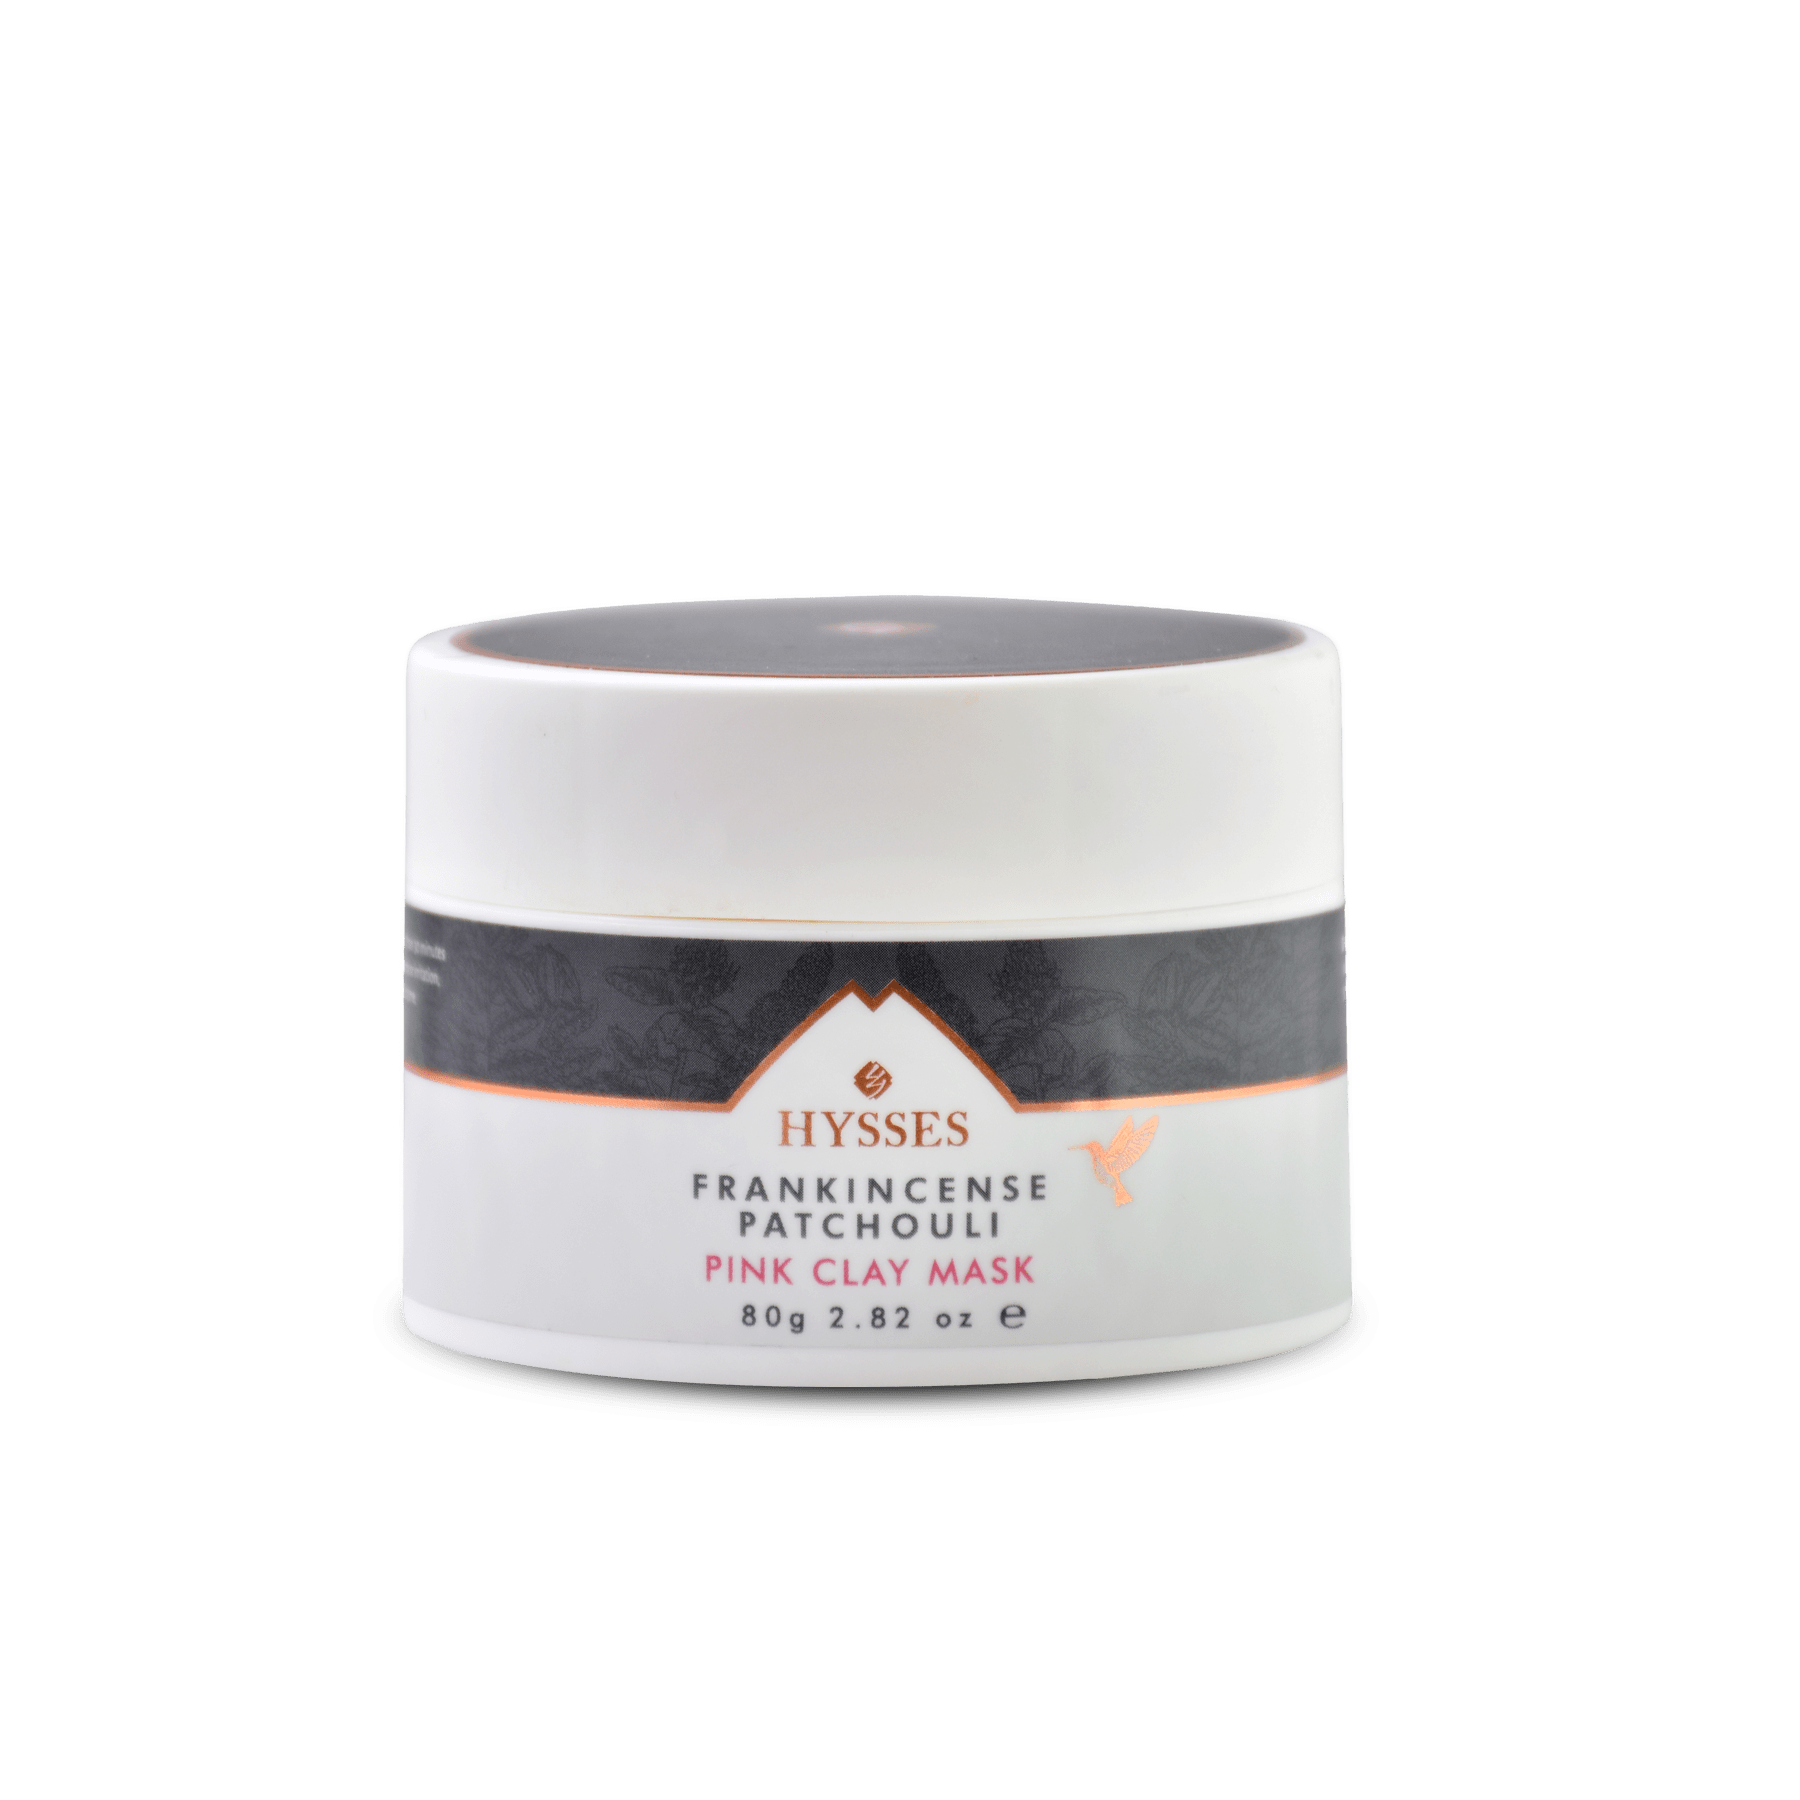 Hysses Face Care Pink Clay Mask Frankincense Patchouli